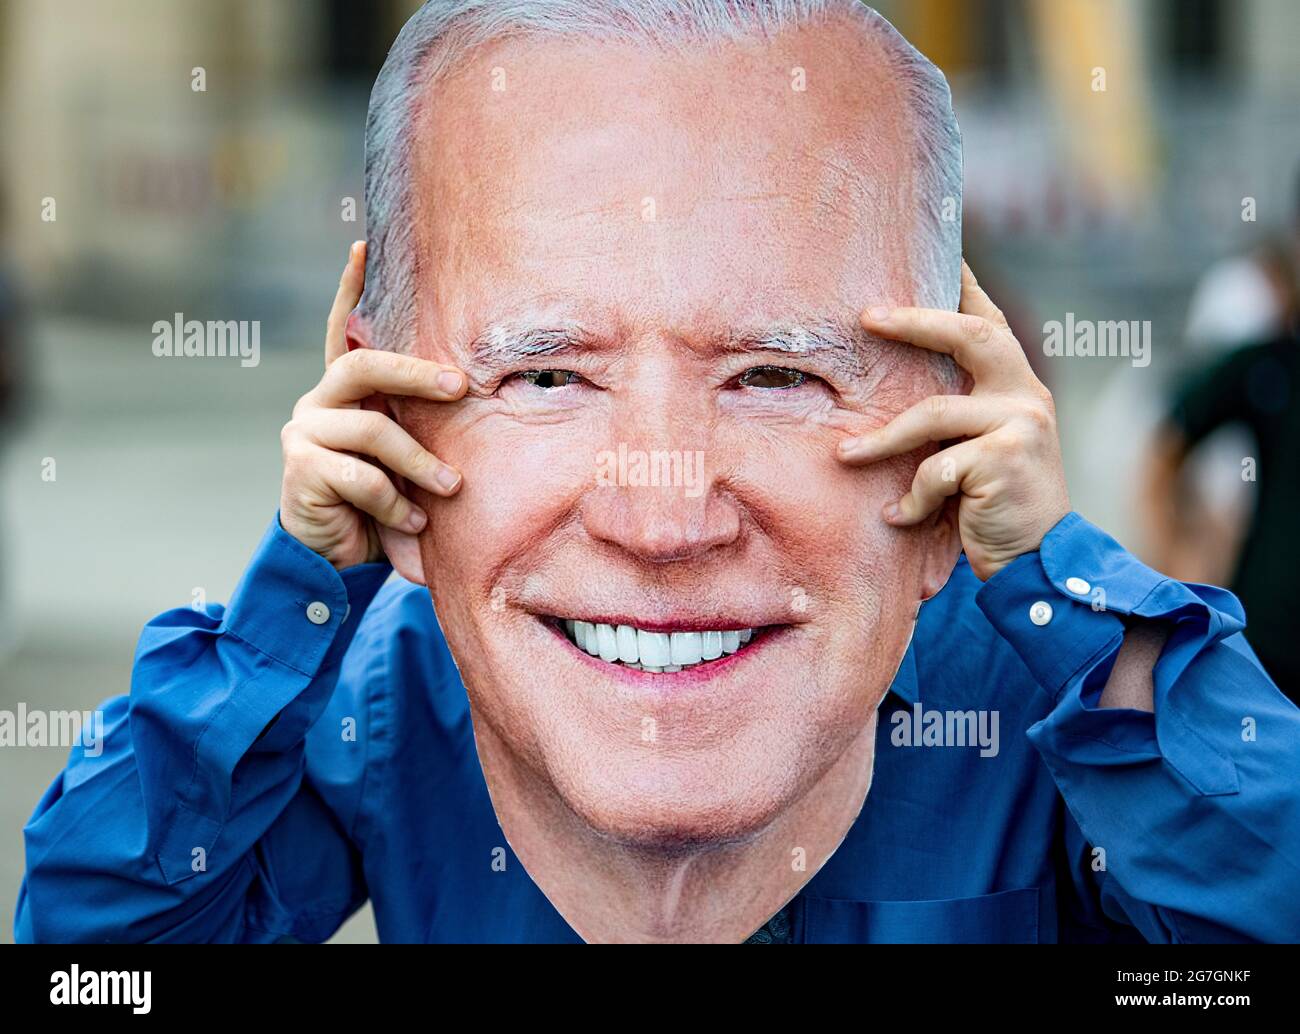 Berlin, Germany. 14th July, 2021. An activist holds a mask of US President Biden in front of his face in front of the Brandenburg Gate. Avaaz activists are calling for the temporary suspension of patent protection for Covid vaccines. Credit: Fabian Sommer/dpa/Alamy Live News Stock Photo